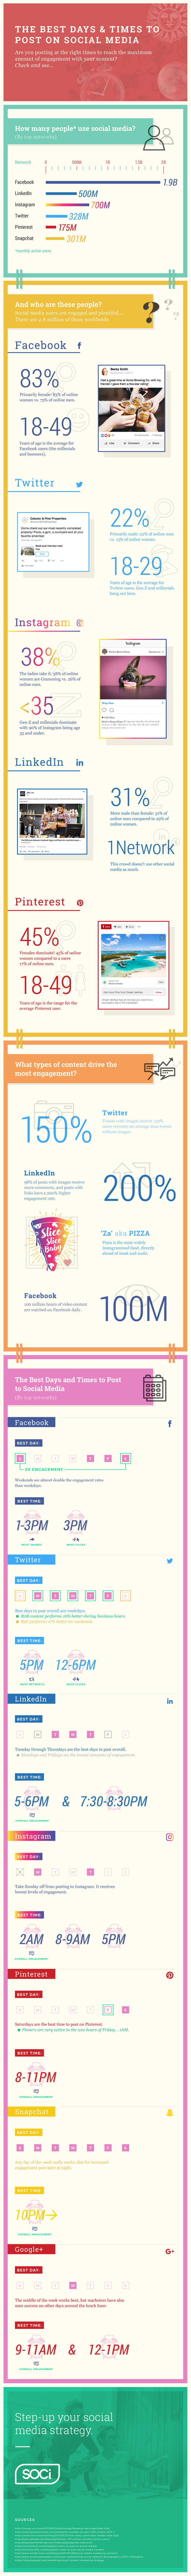 best days and times to post to social media infographic